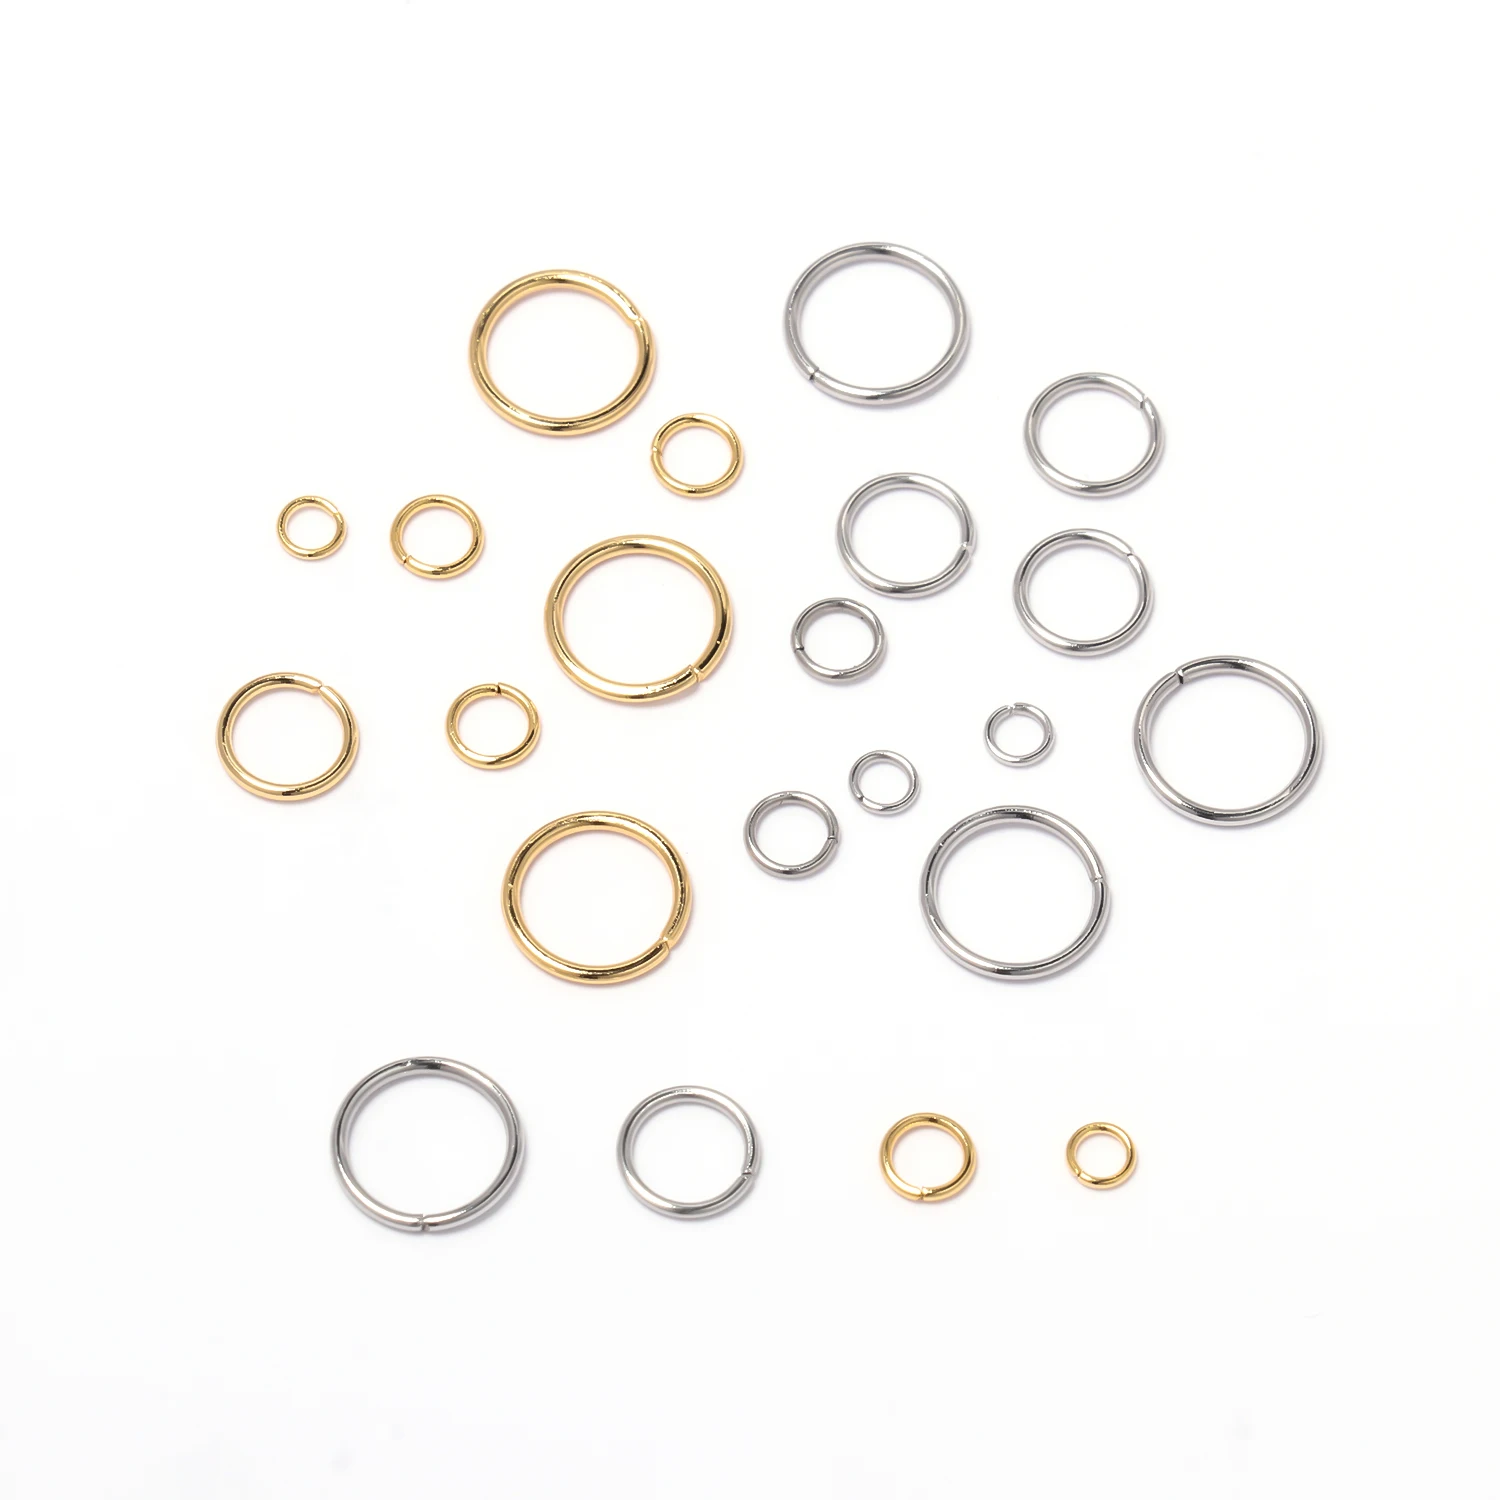 100 – 8mm Stainless steel split jump rings – Click the REWARDS tab for a  chance to win one of 3 custom displays